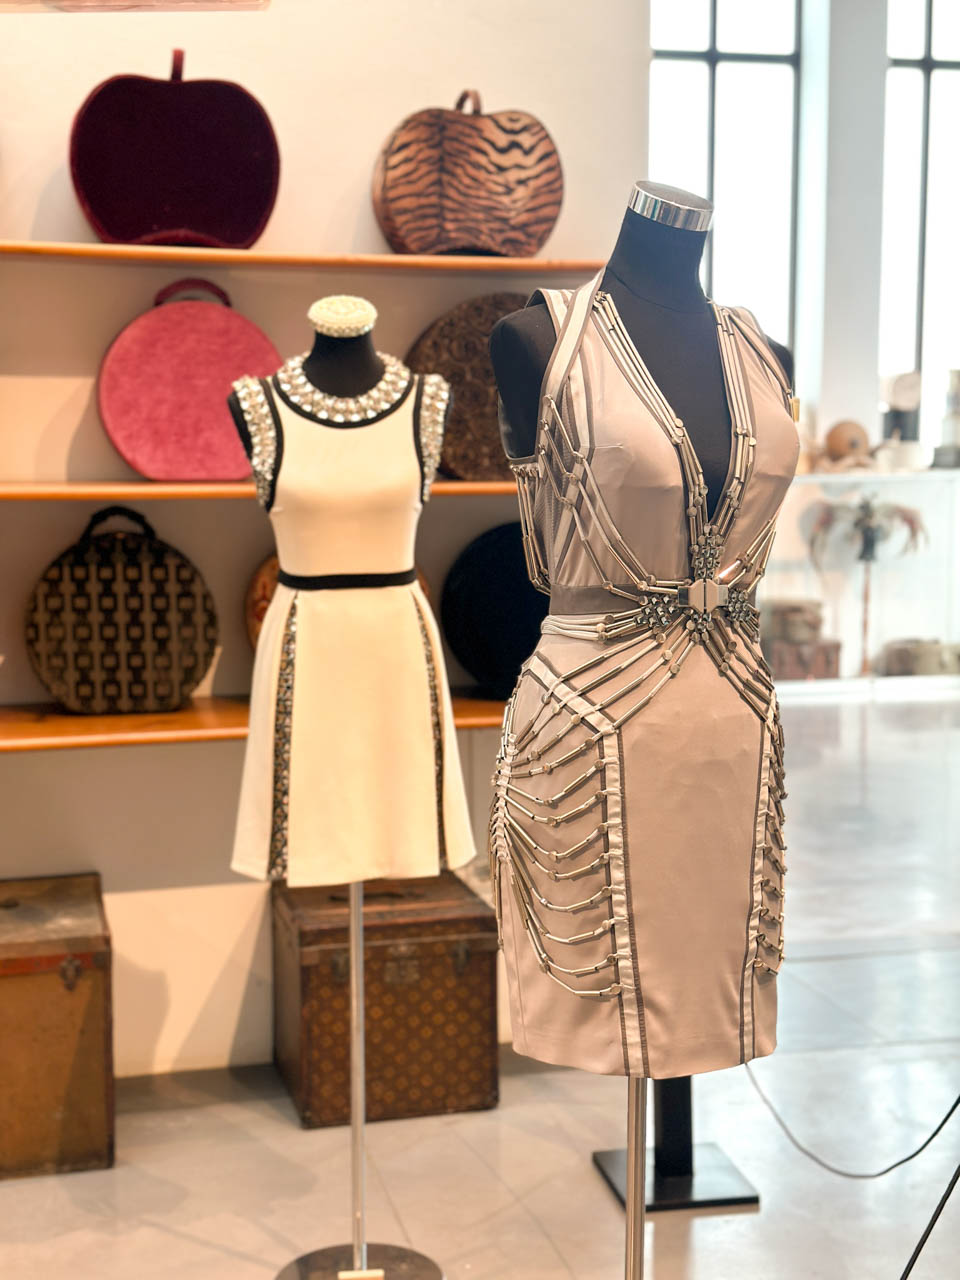 Mannequins dressed in a black and white dress and another with silver details, standing with round hat boxes on a shelf behind them